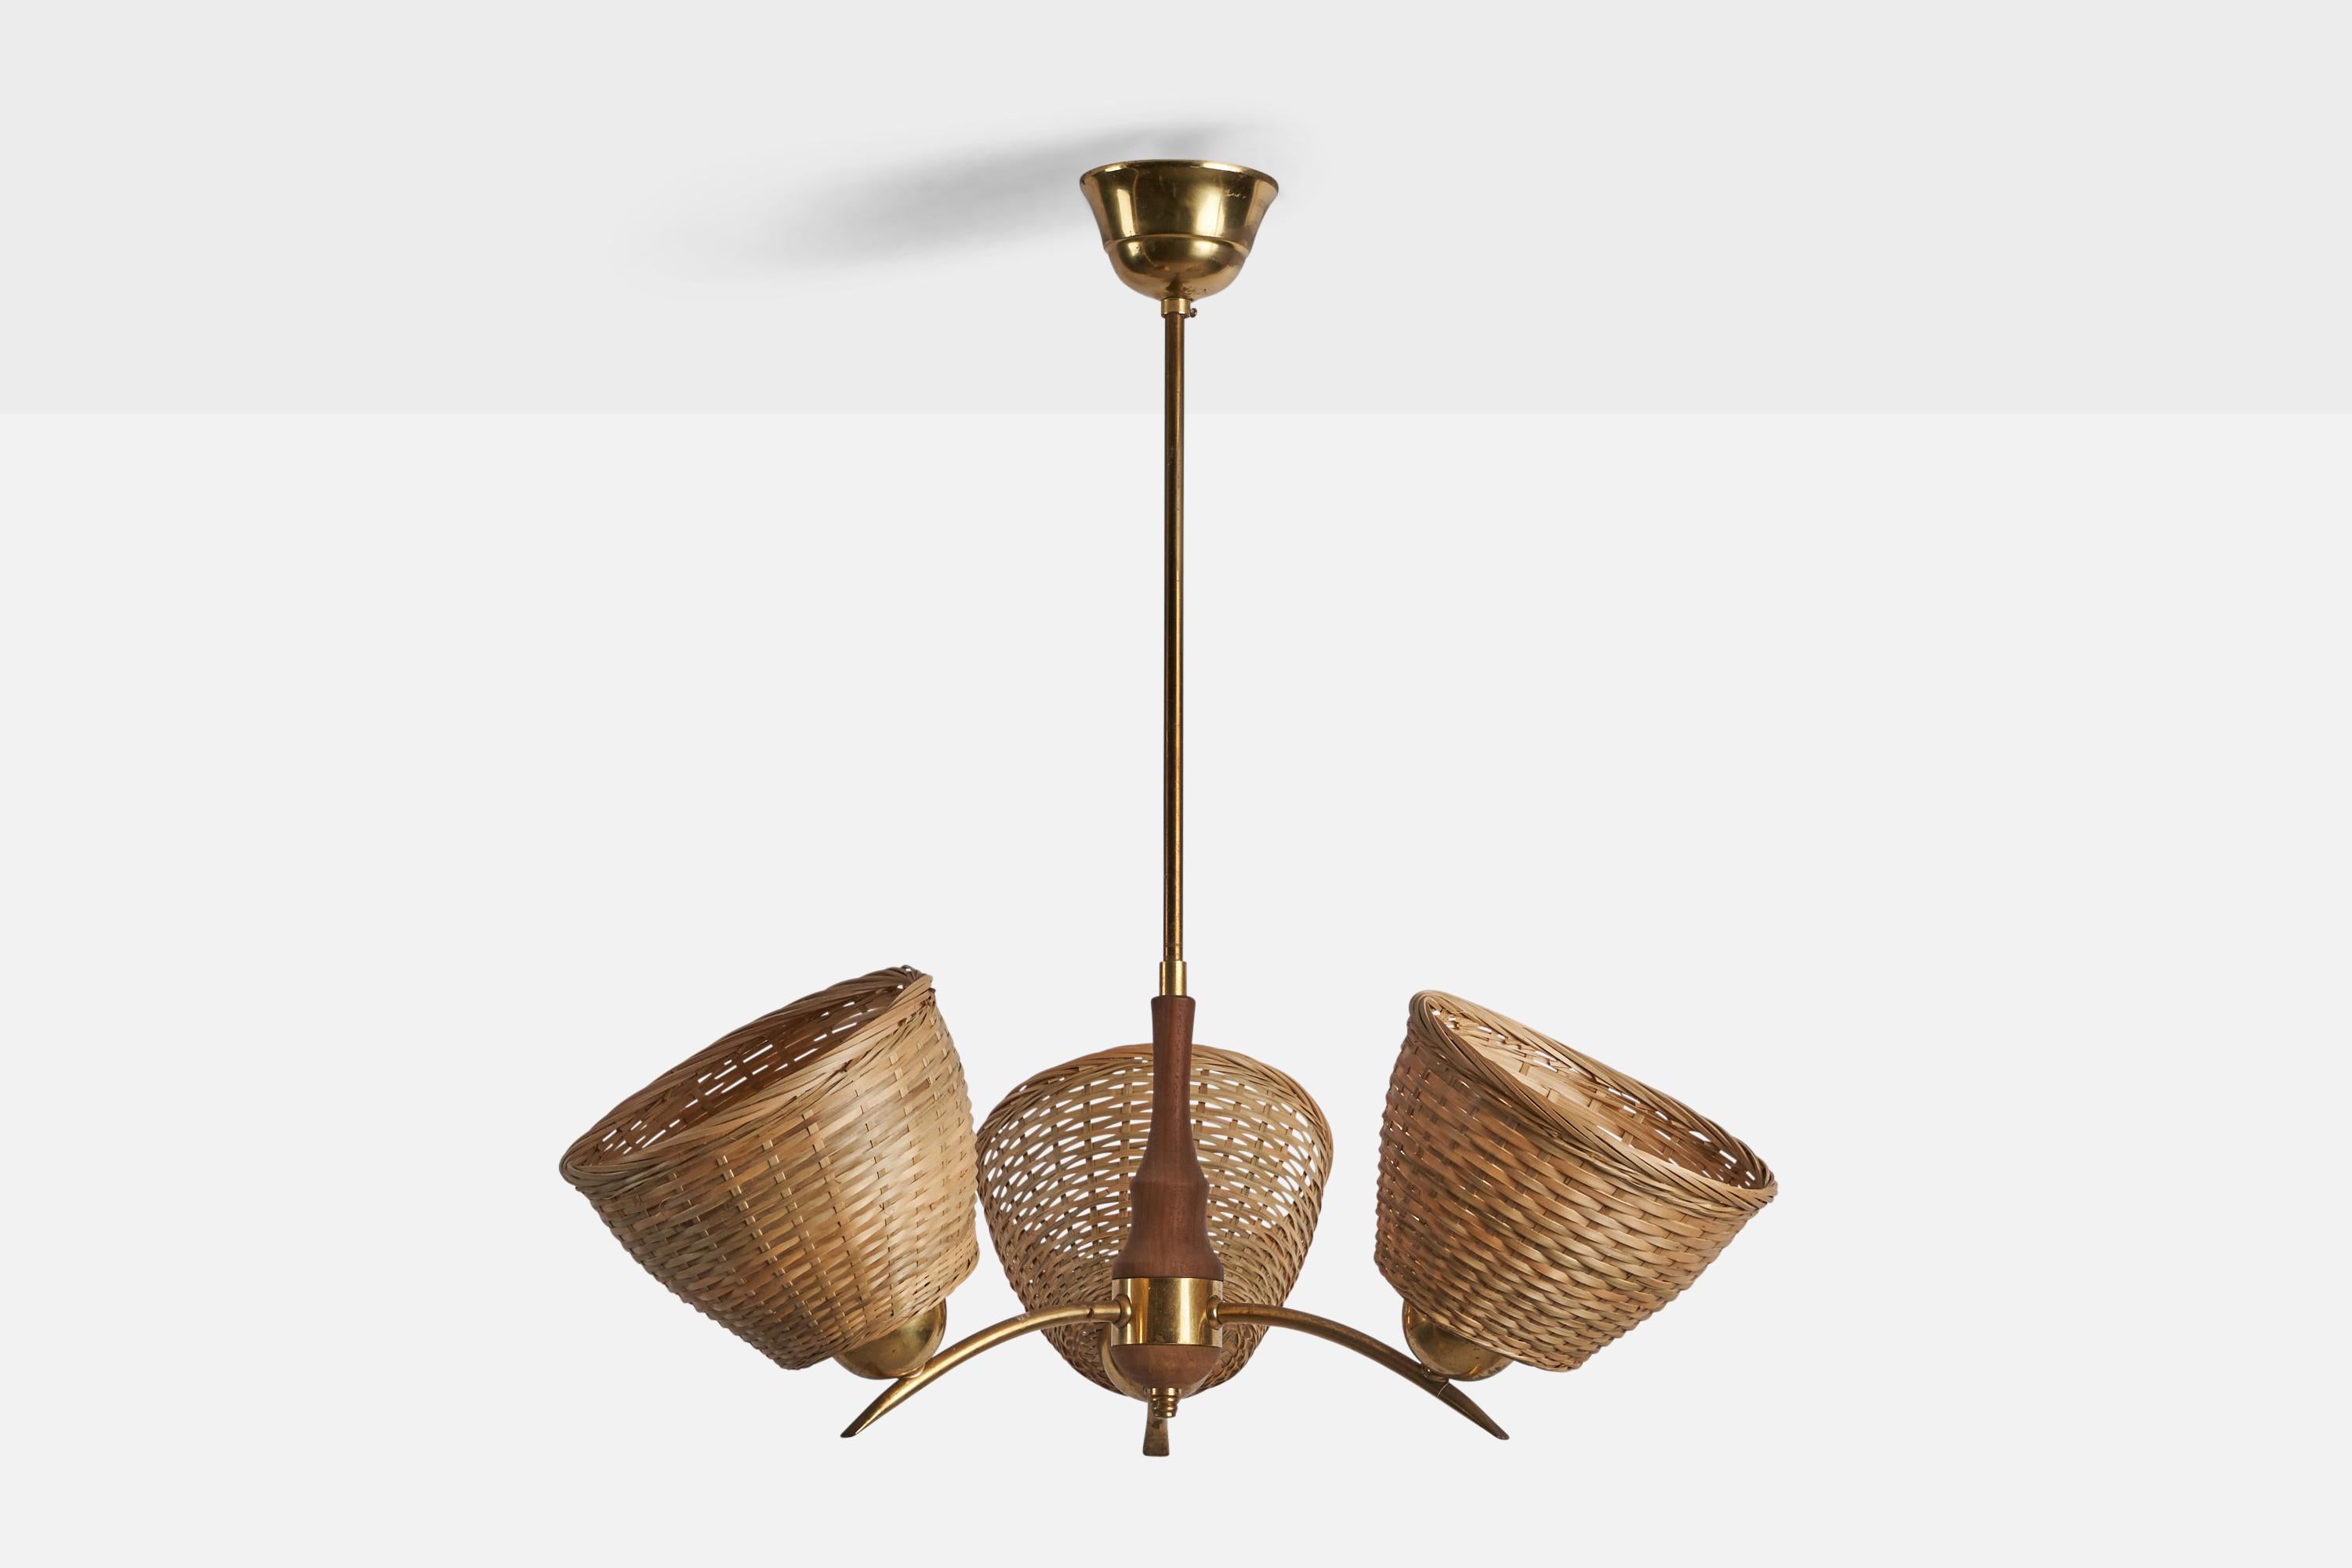 A three-armed brass teak and rattan chandelier designed and produced in Sweden, c. 1950s.

